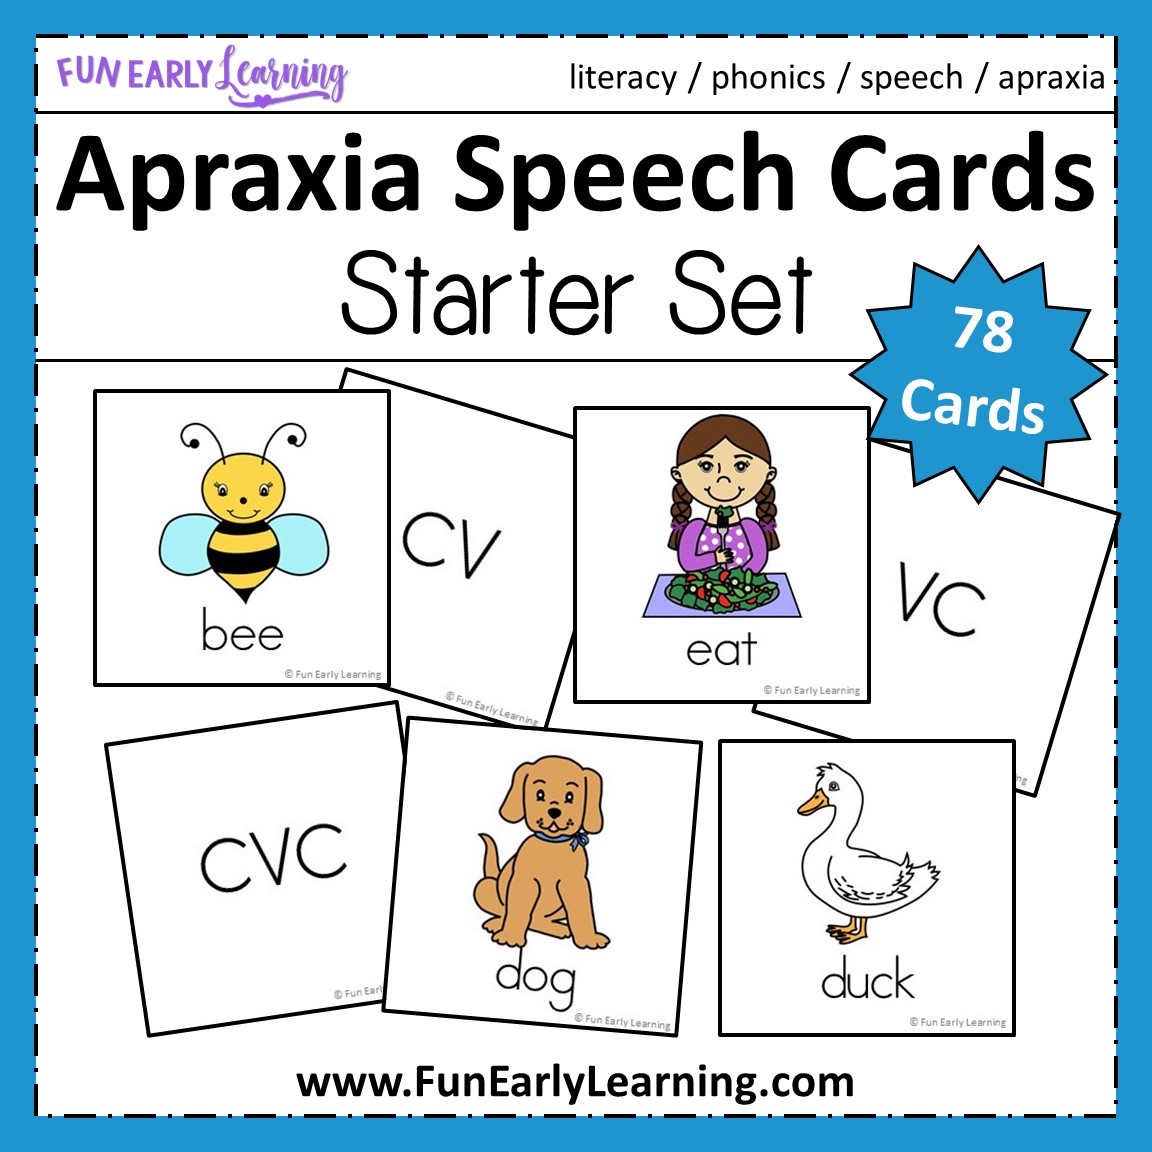 Apraxia Speech Cards for Speech Therapy Starter Set Fun Early Learning